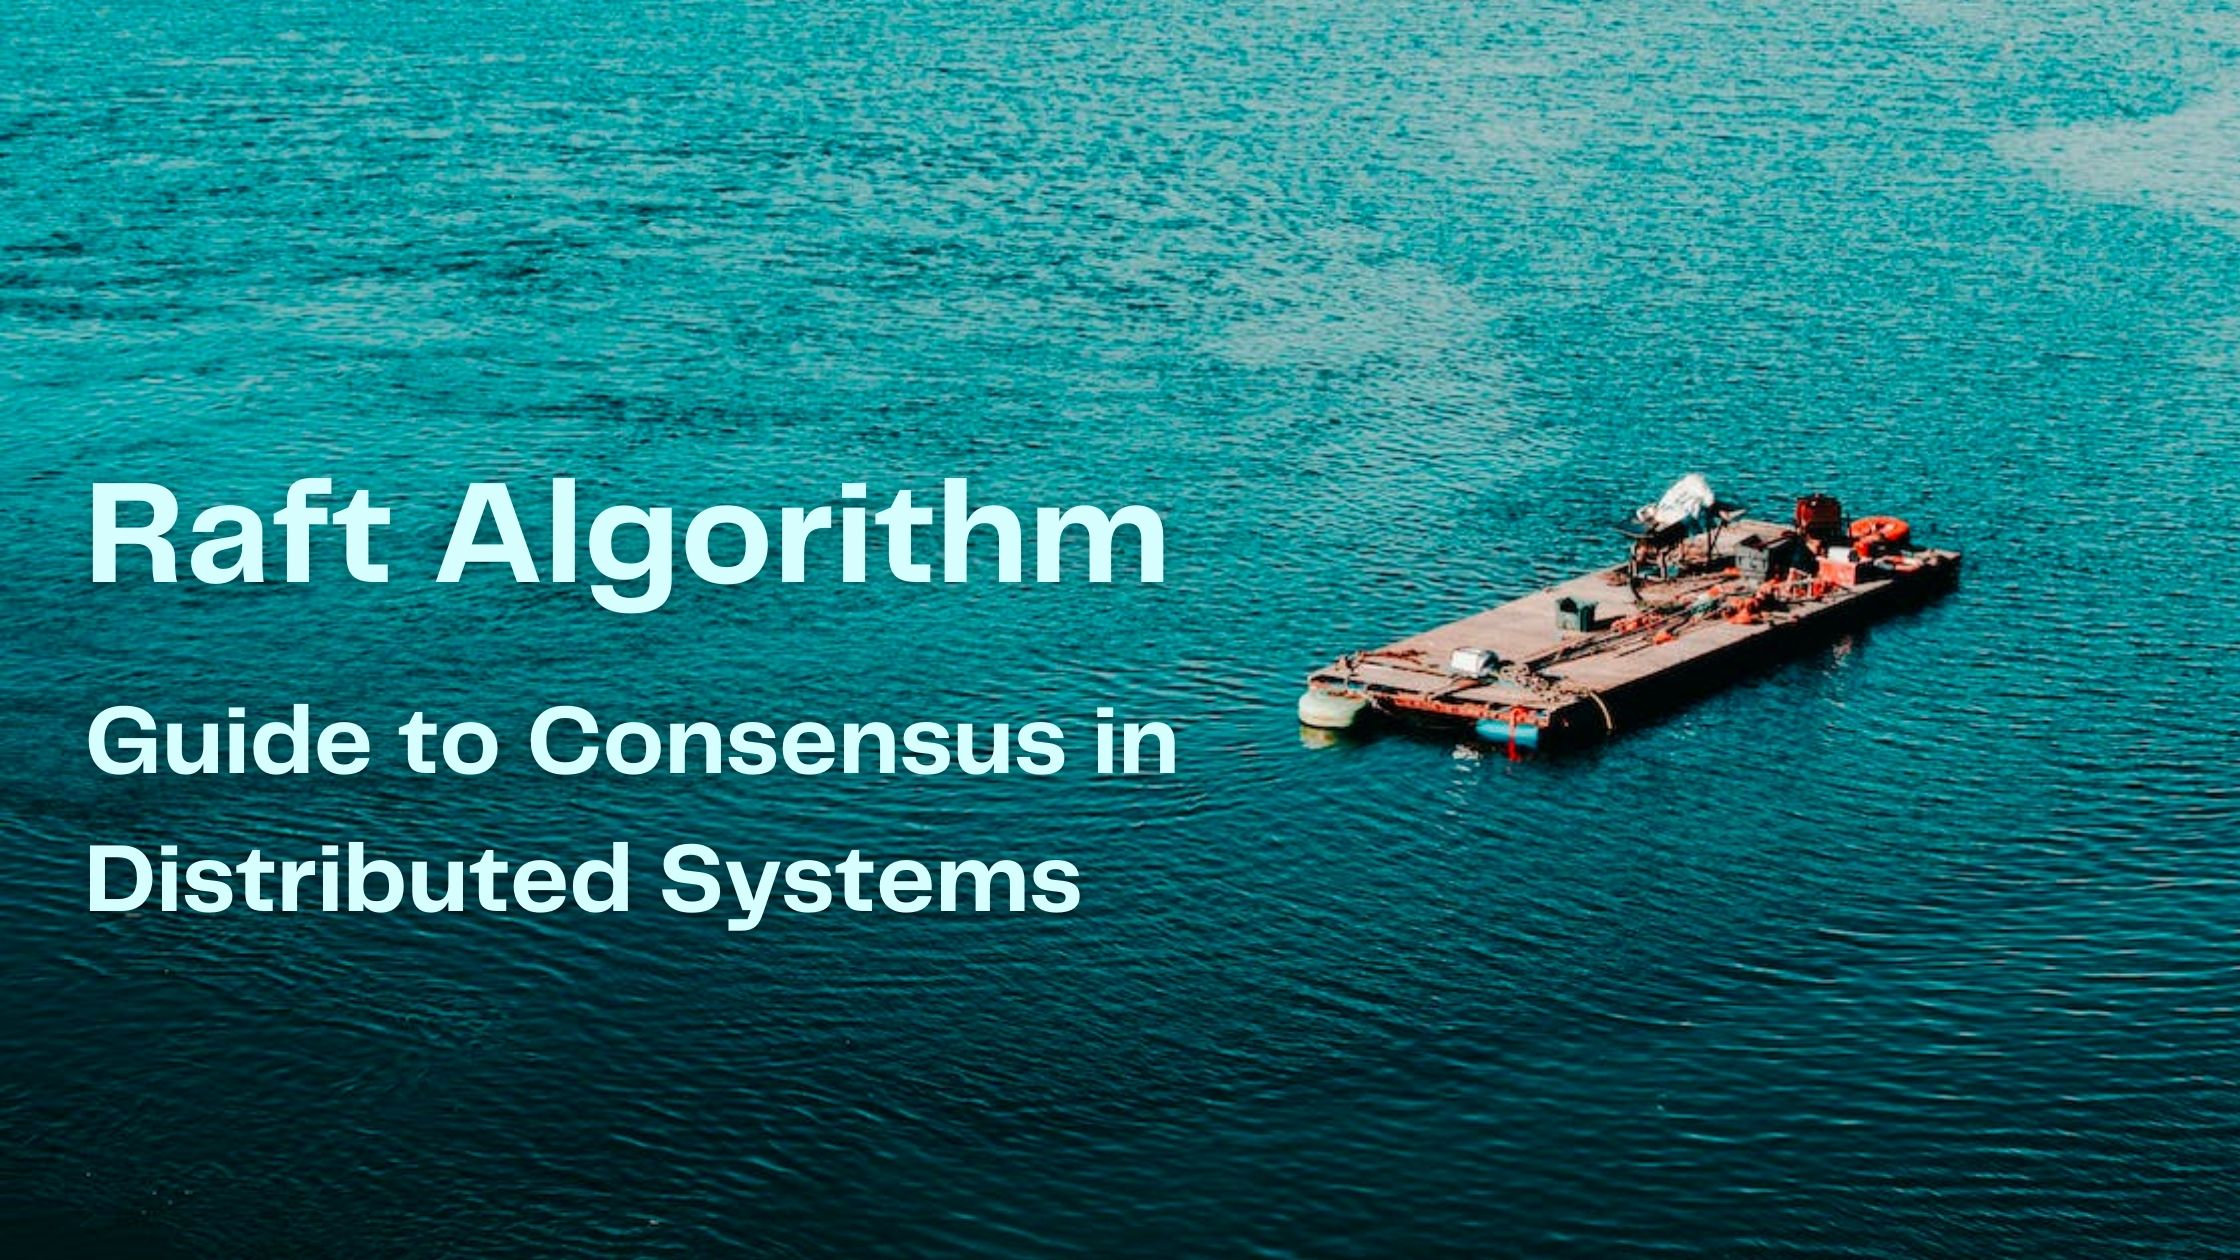 Row, Row, Raft Your Nodes: A Guide to Consensus in Distributed Systems